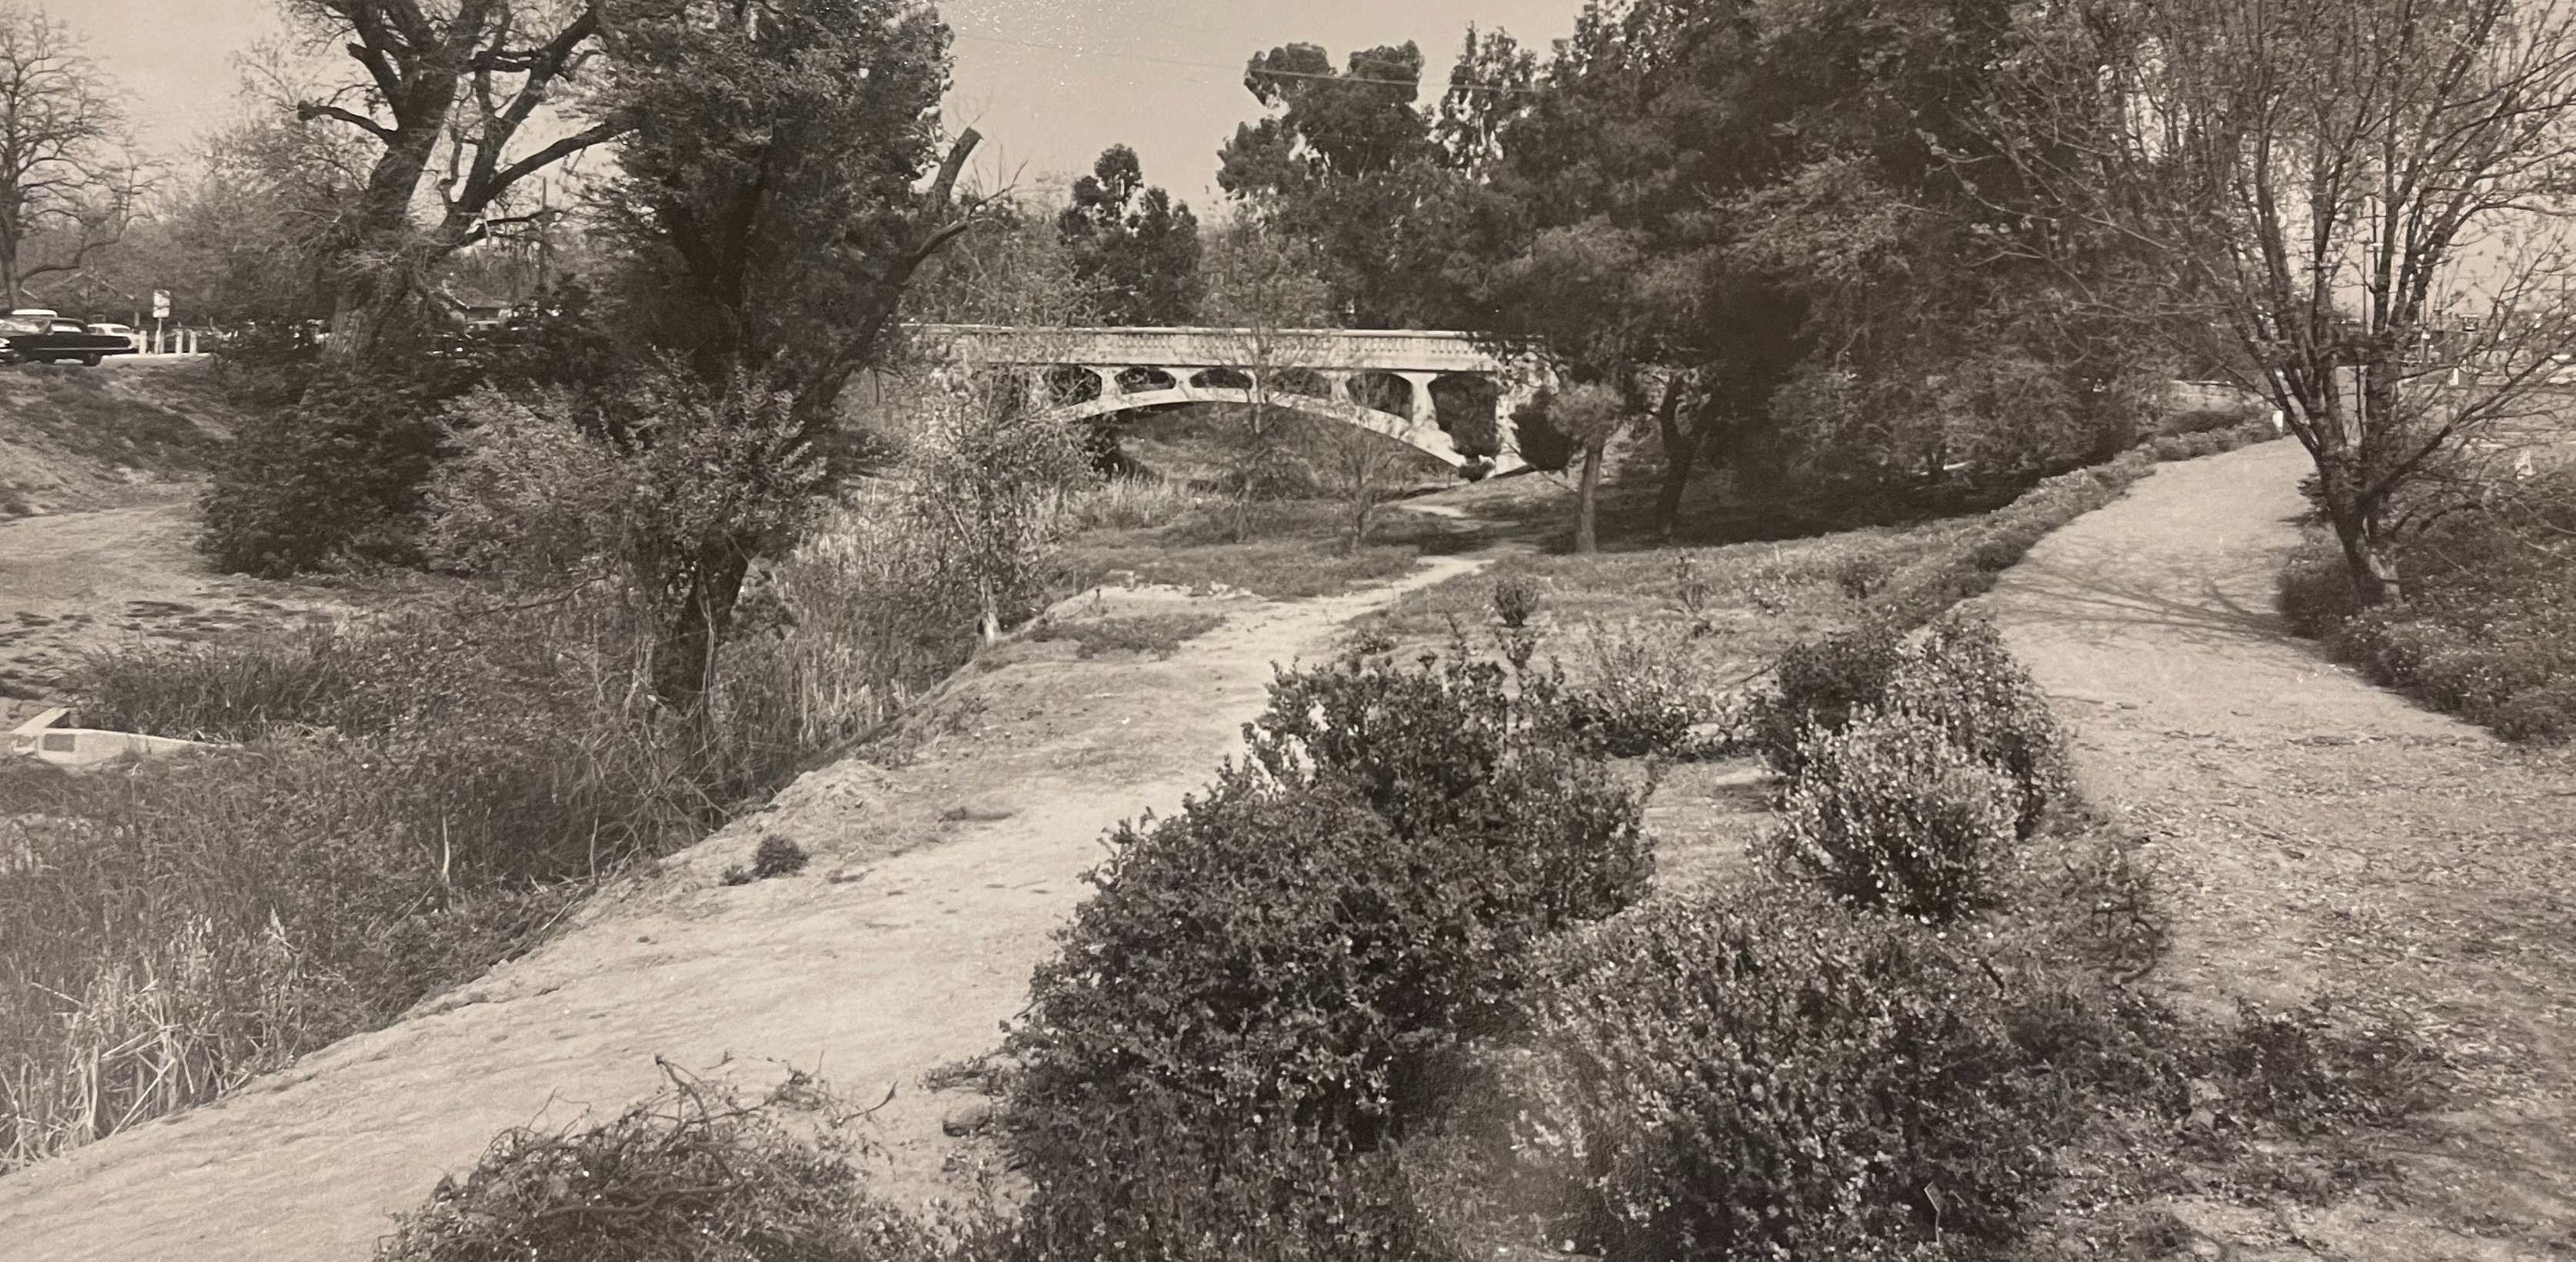 Black and white image of old A Street bridge circa 1950s or 60s. The image of shows the waterway when it was seasonally dry.